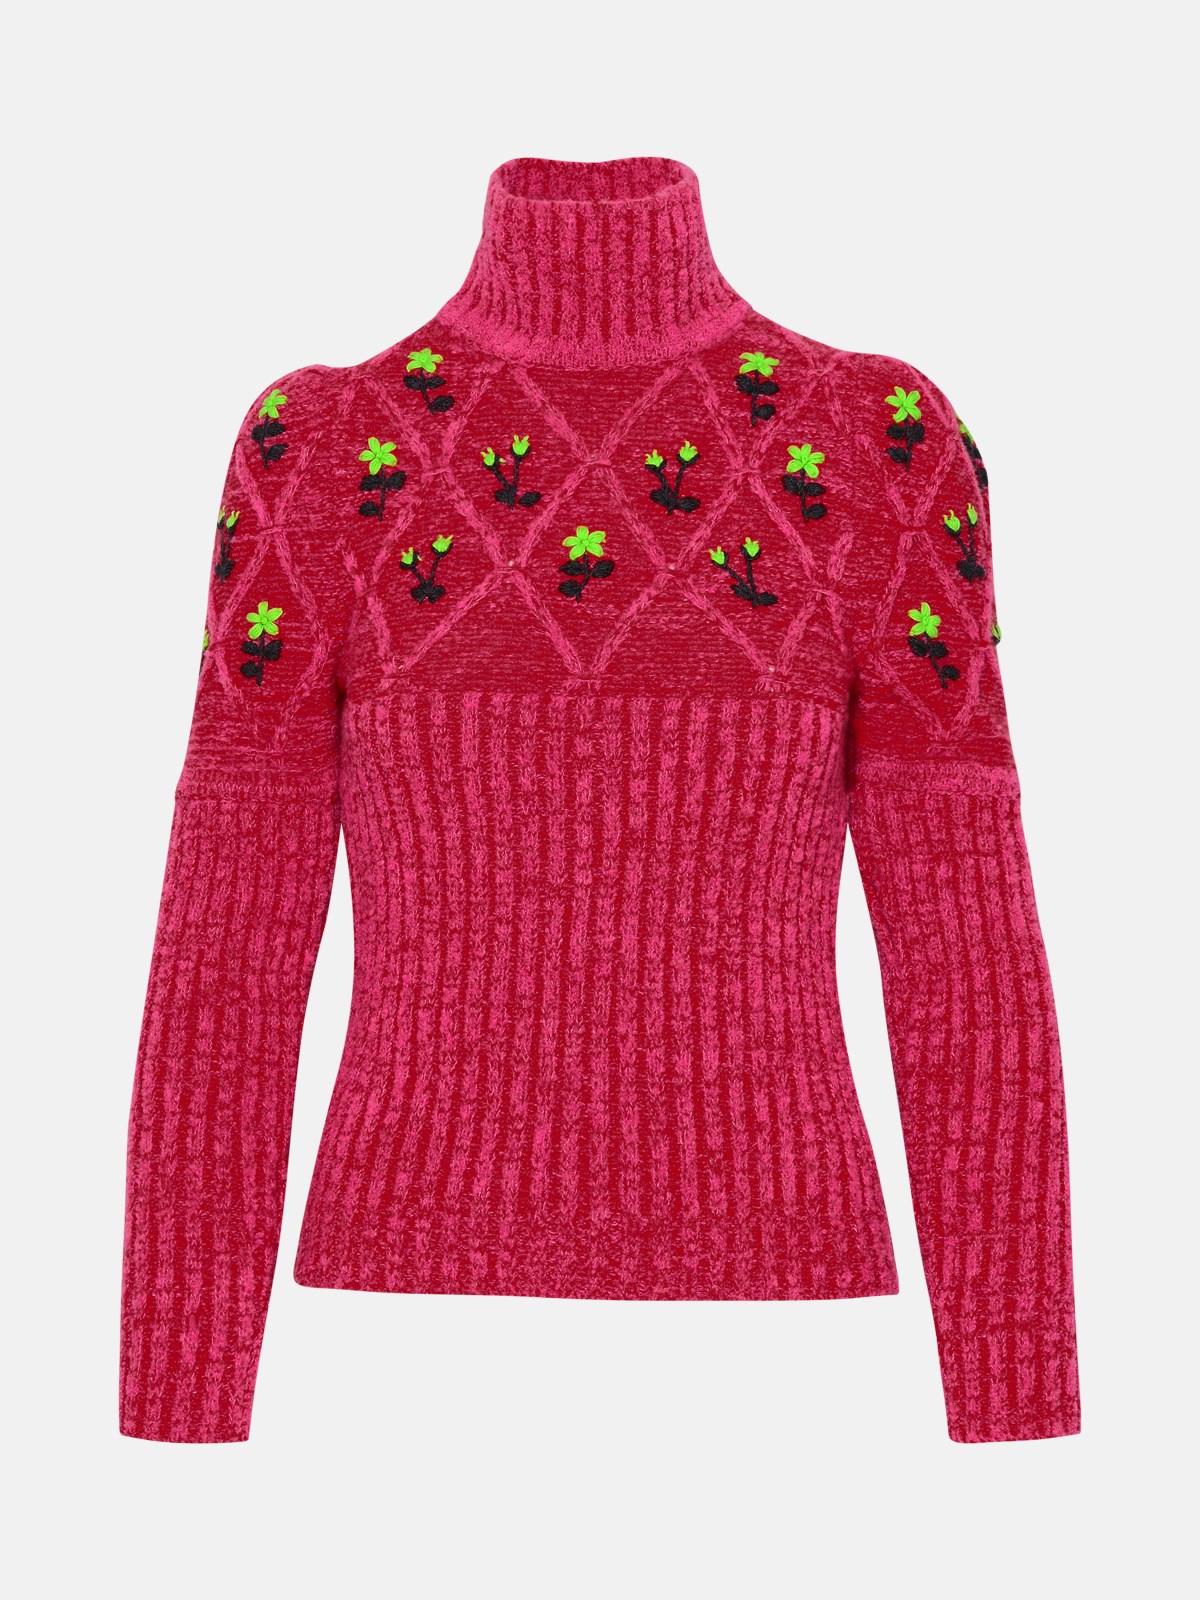 Cormio Oma Pink Wool Blend Turtleneck Sweater In Red